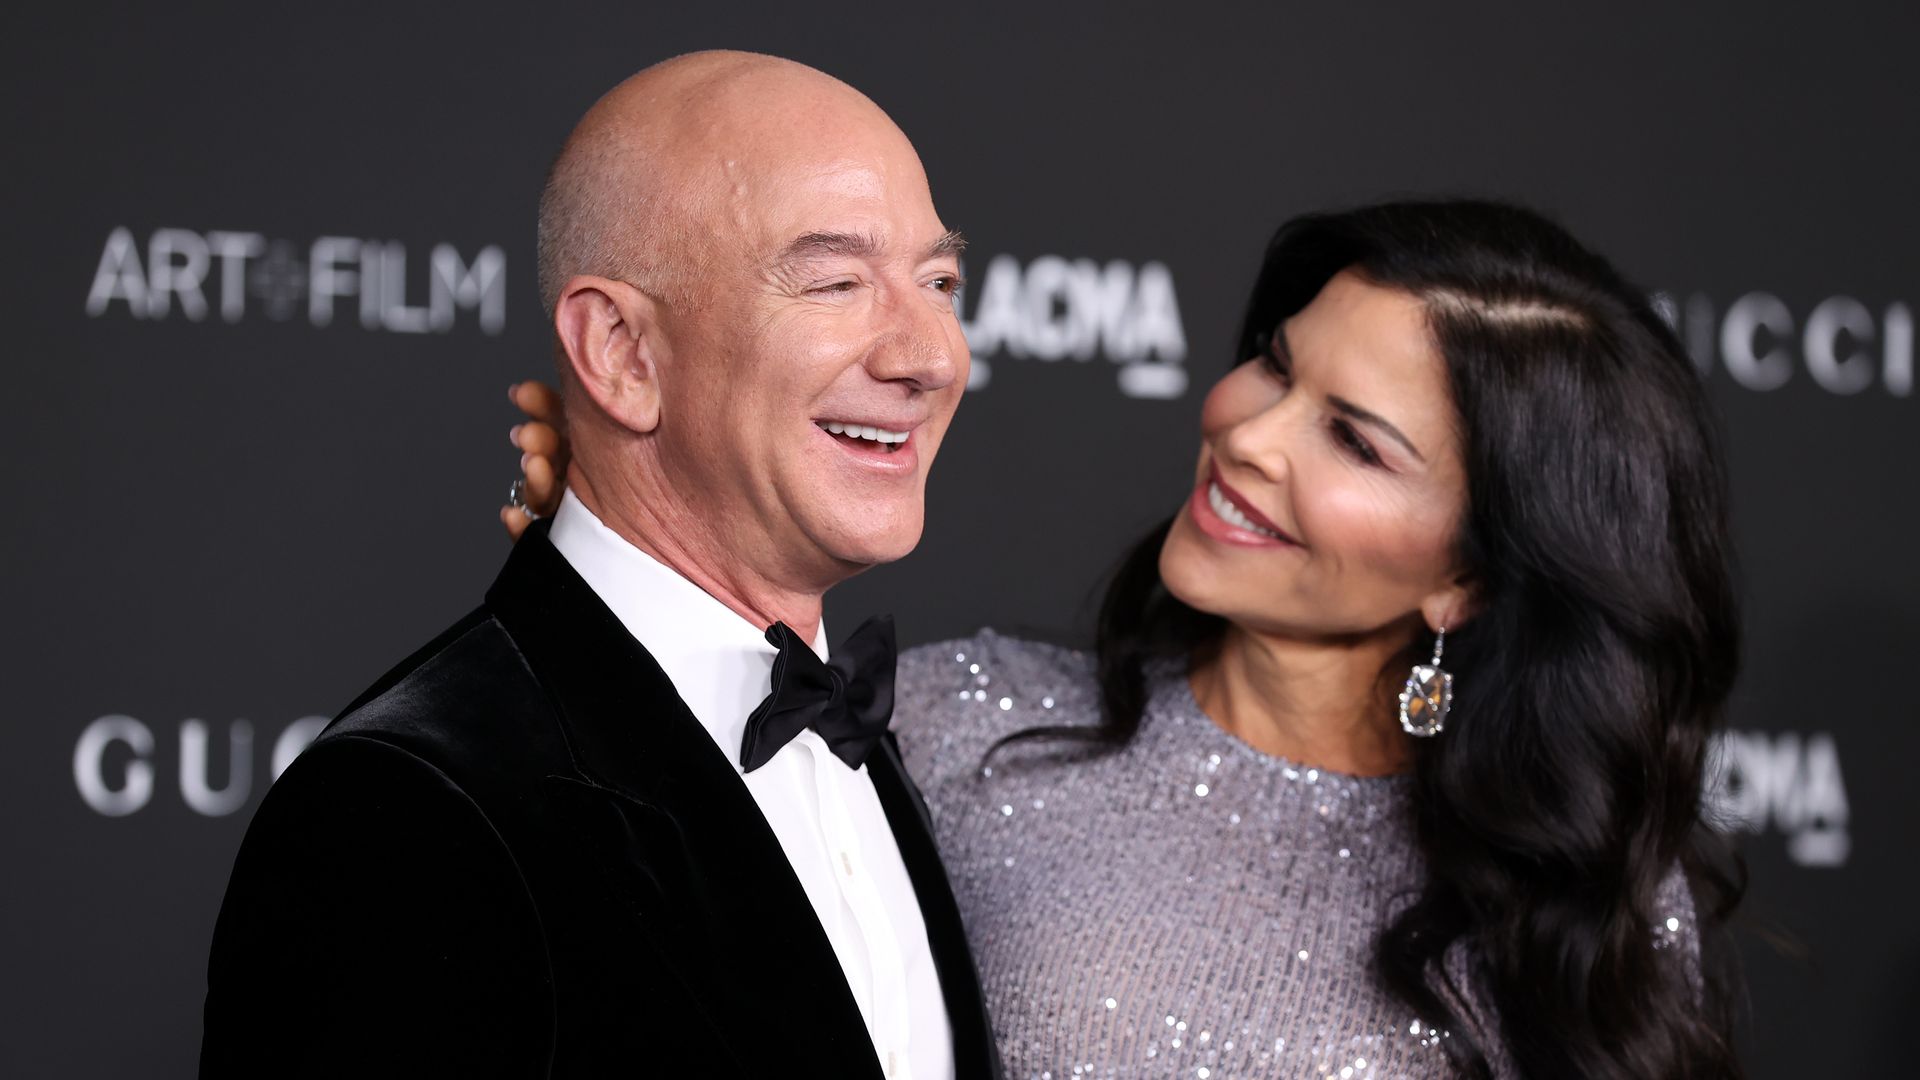 Jeff Bezos and Lauren Sanchez attend the 10th Annual LACMA ART+FILM GALA presented by Gucci at Los Angeles County Museum of Art on November 06, 2021 in Los Angeles, California